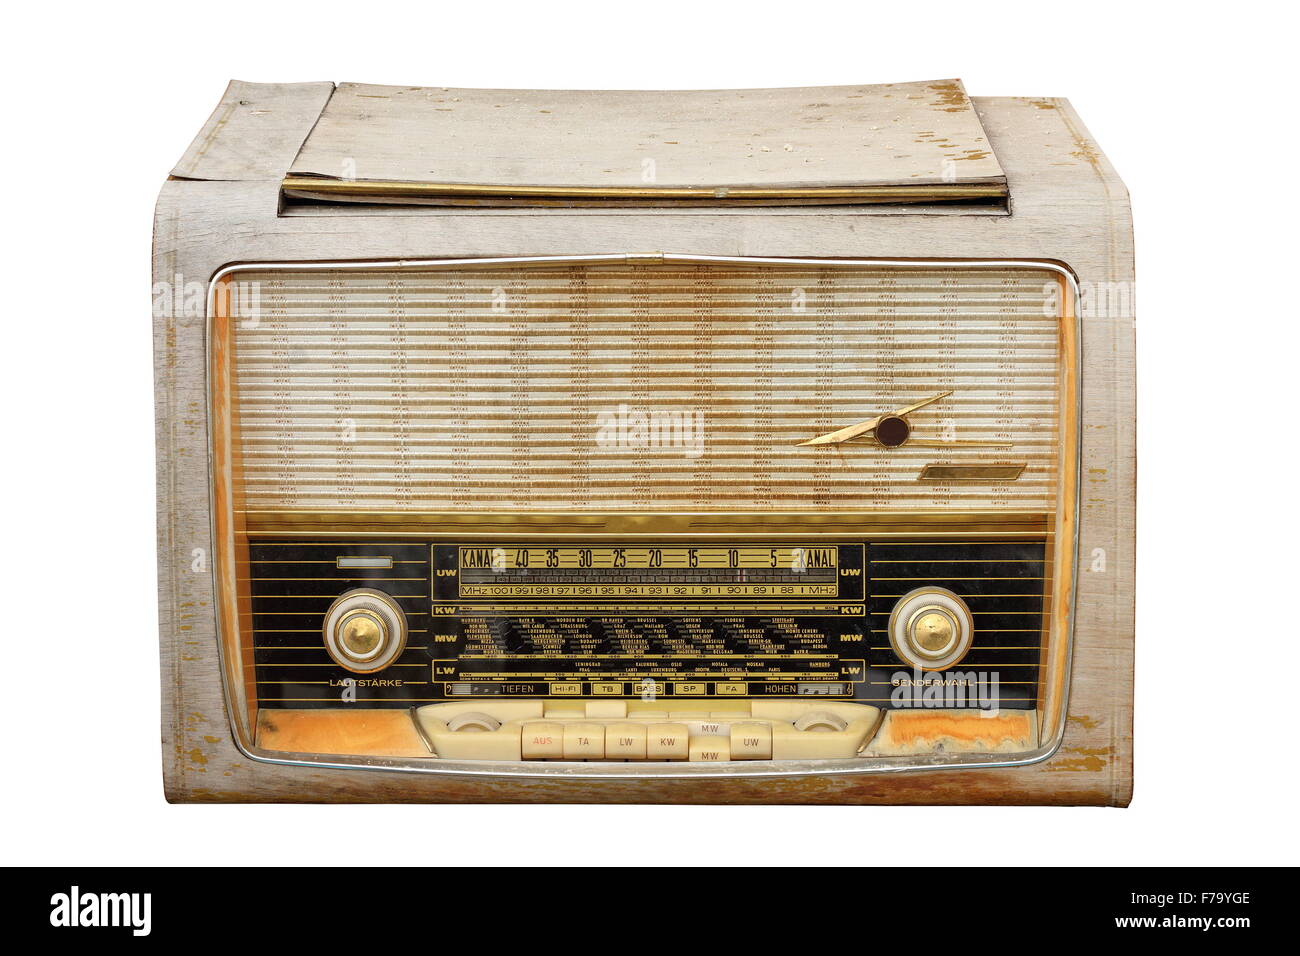 Old weathered wooden radio isolé sur fond blanc Banque D'Images